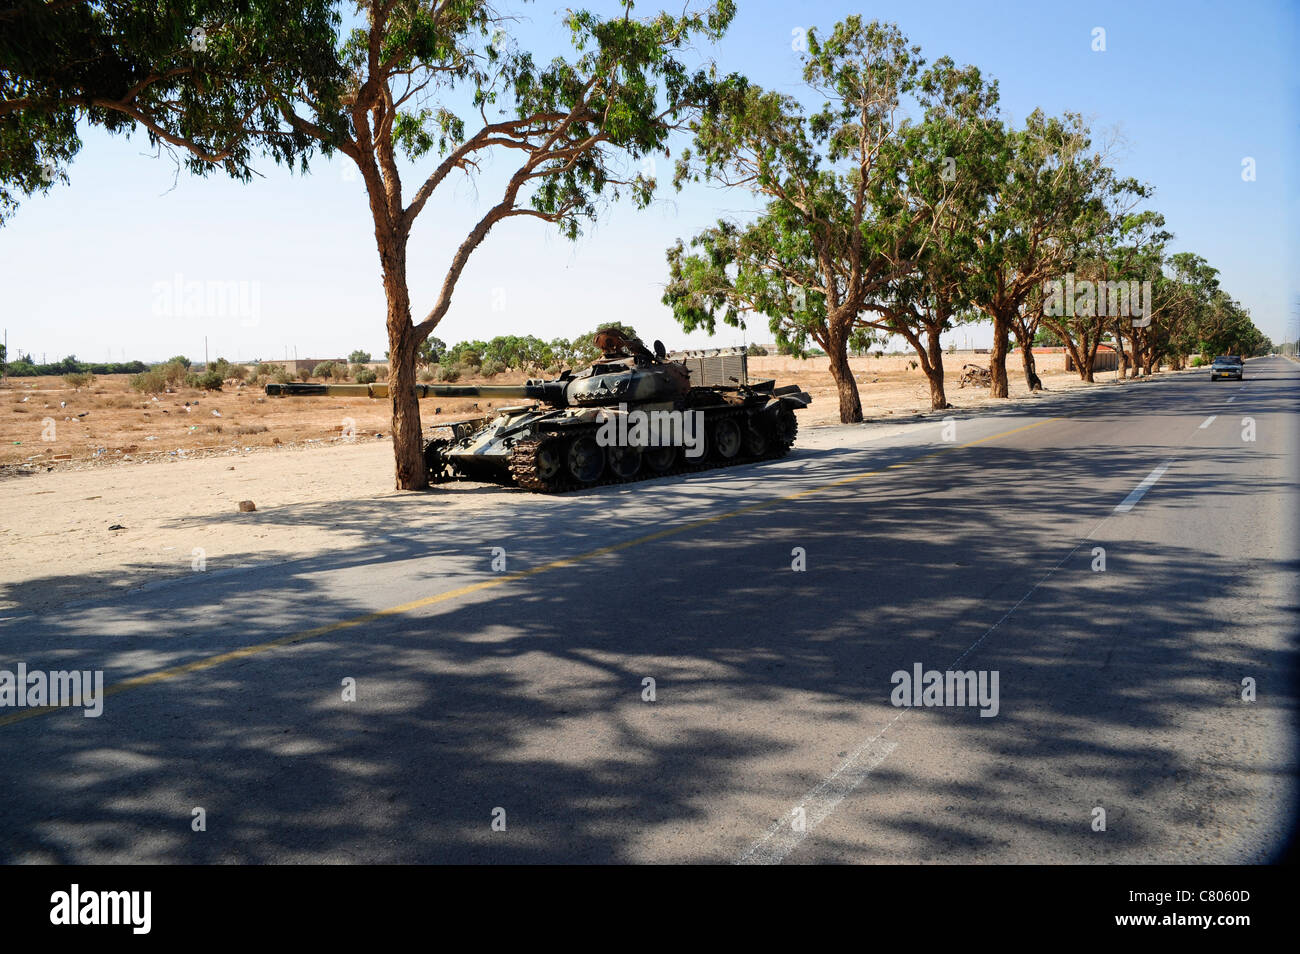 A T-72 tank destroyed by NATO forces just outside Benghazi, Libya. Stock Photo